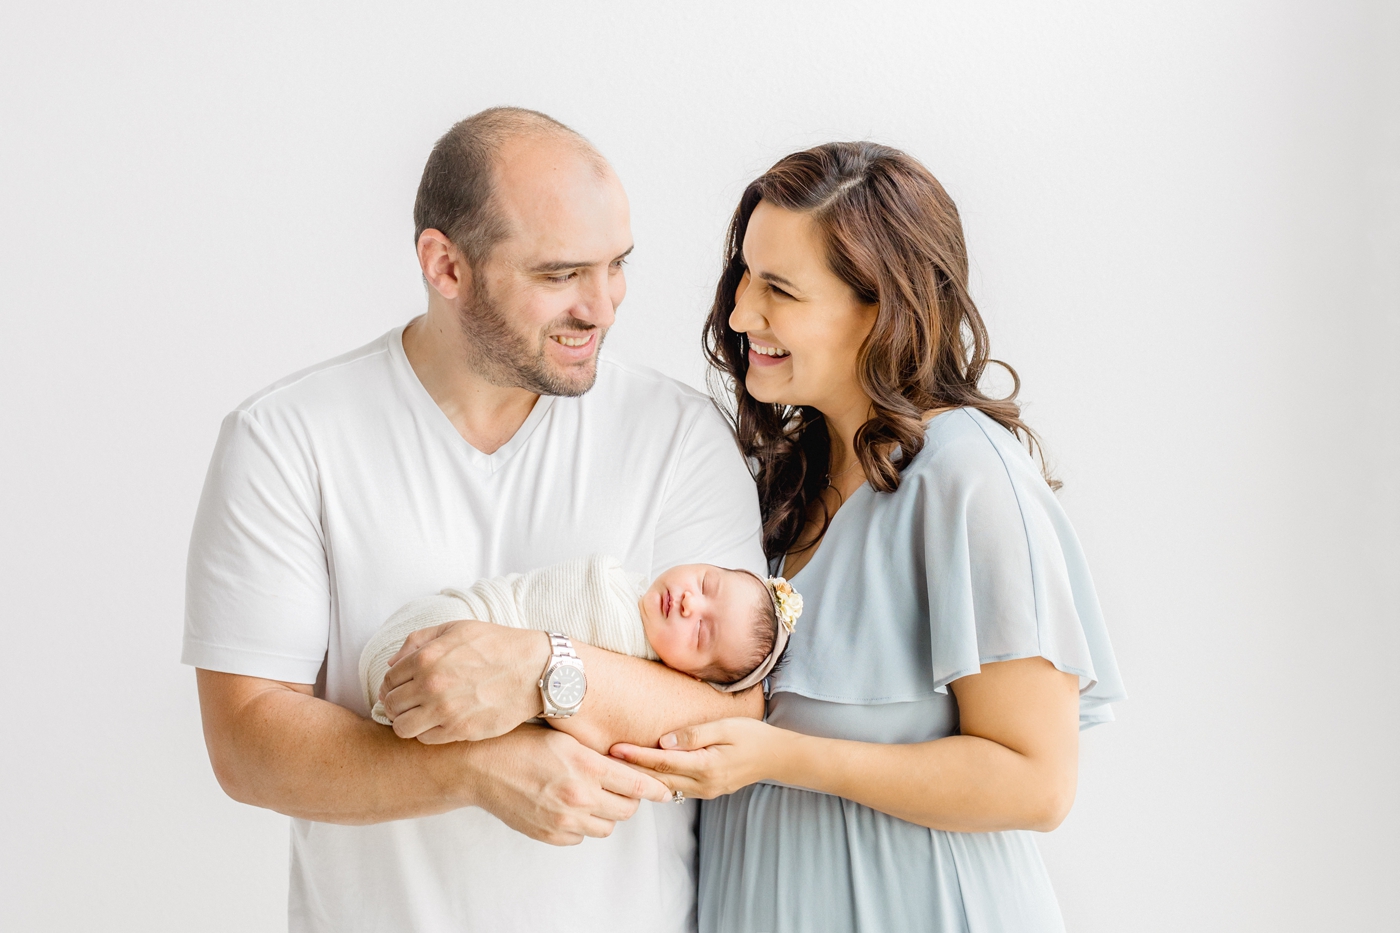 Mom and Dad smiling at each other in studio newborn session near Cedar Park TX.Photo by Sana Ahmed Photography.